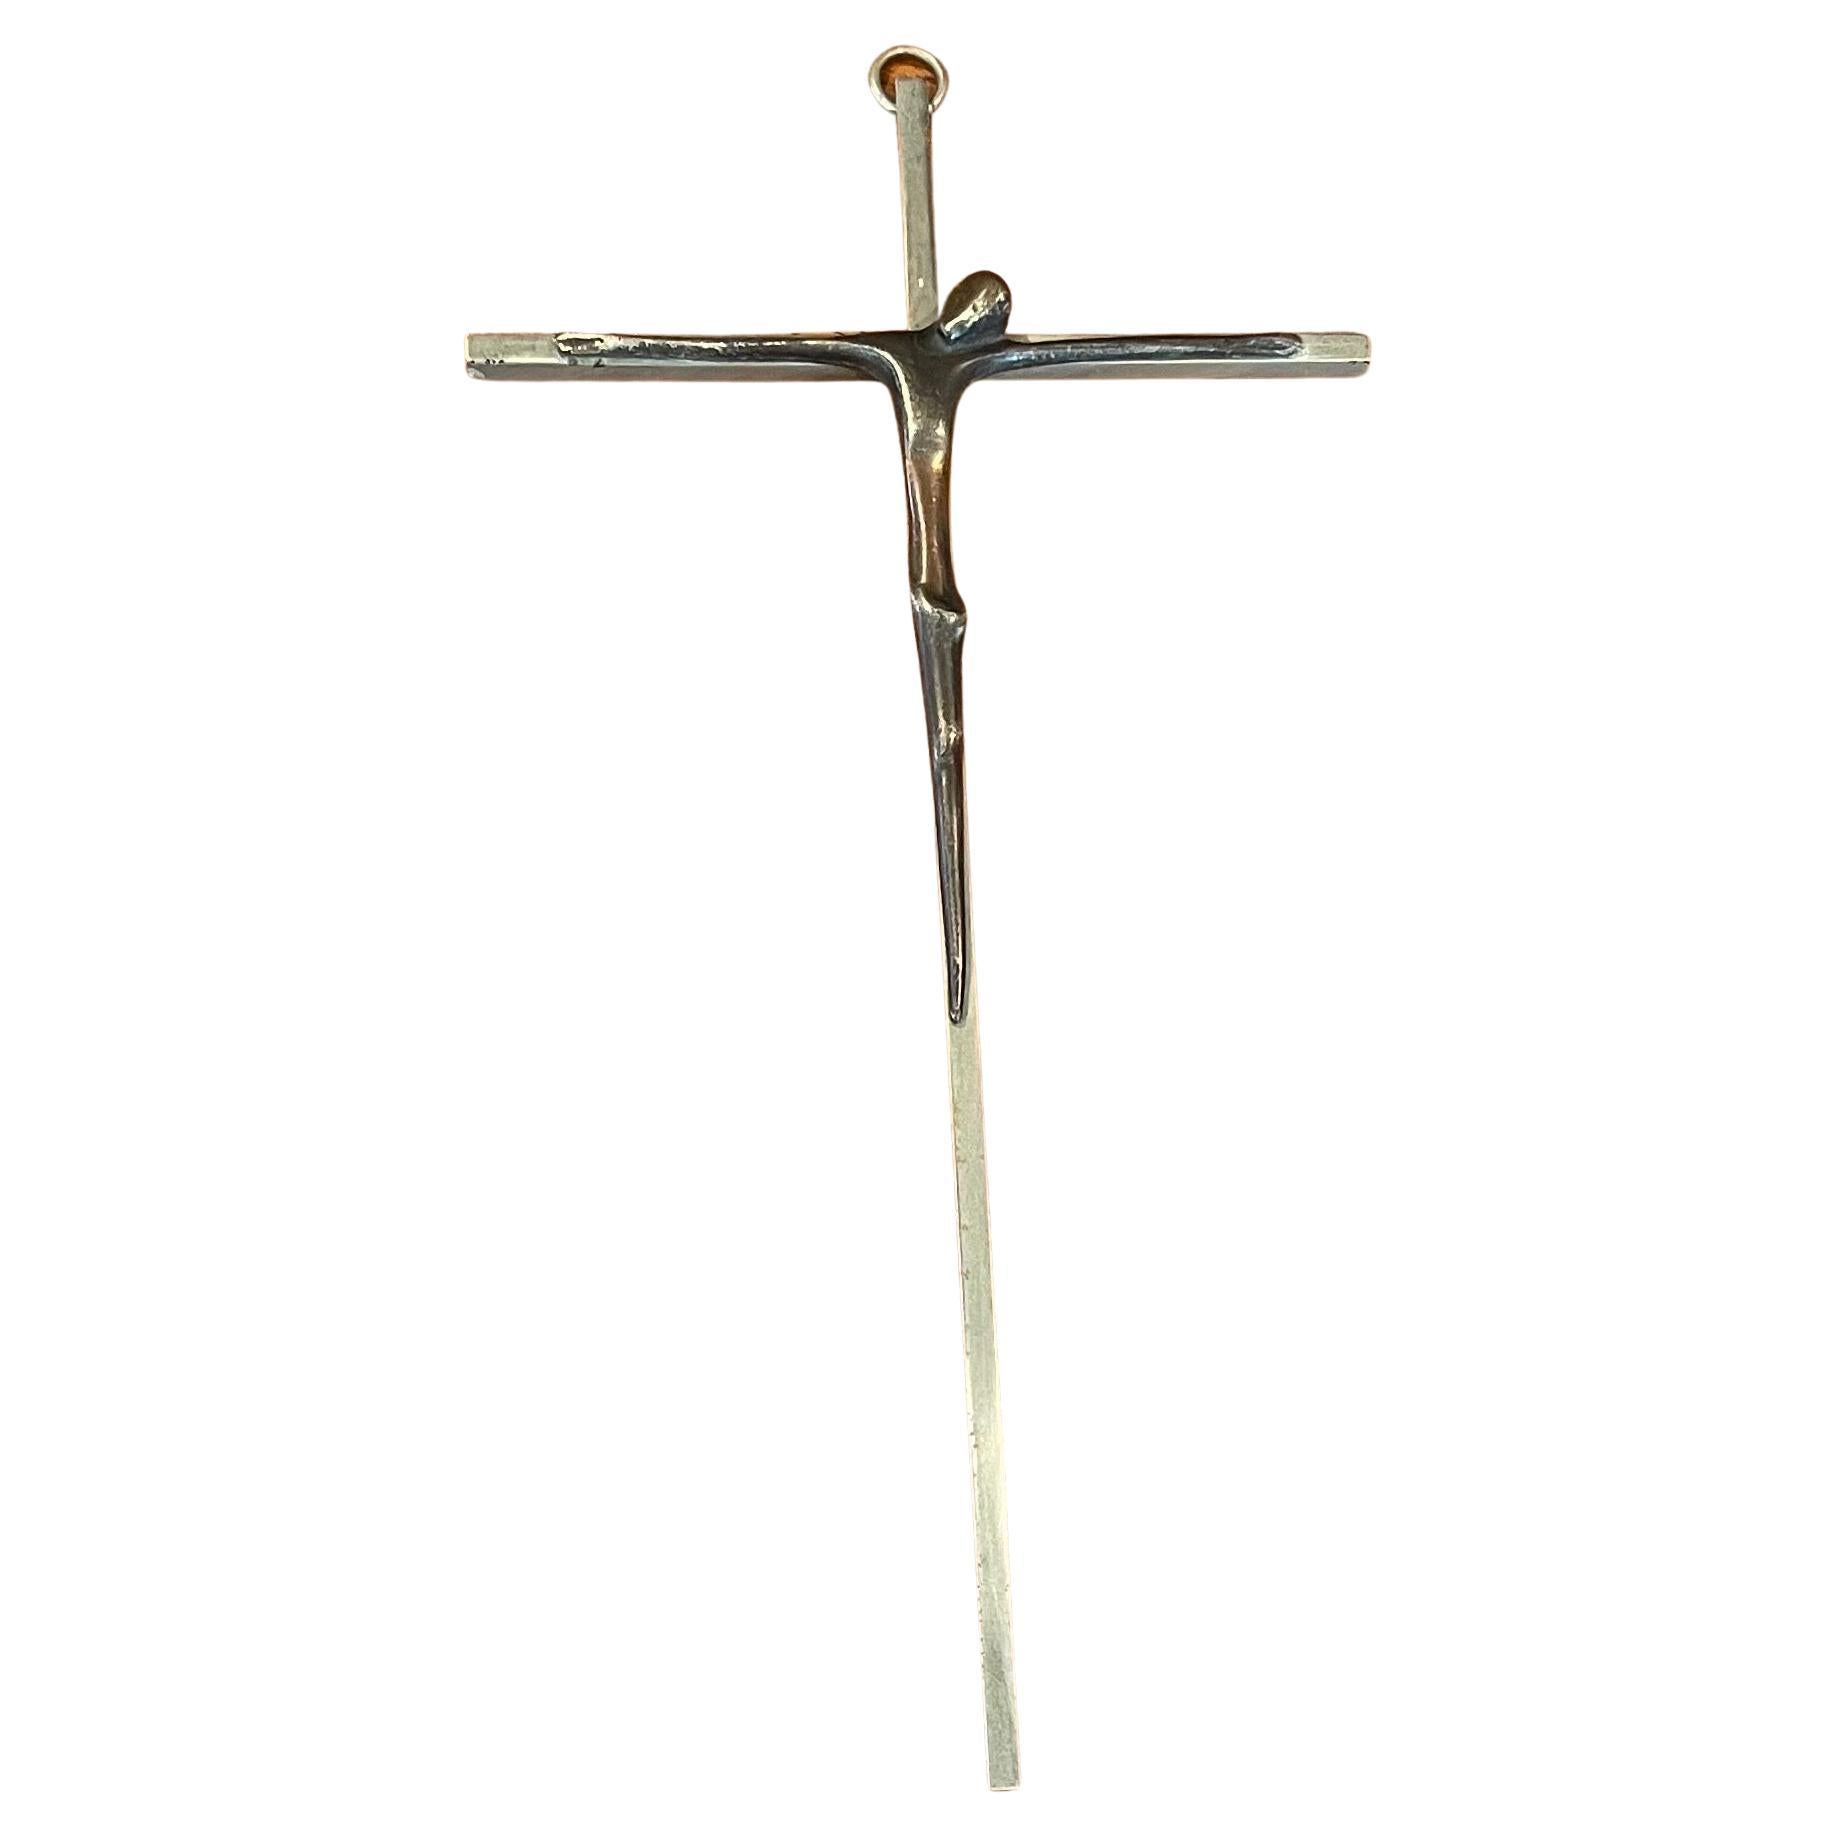 Modernist stainless steel crucifix / cross with Jesus, circa 1970s. The piece measures 5